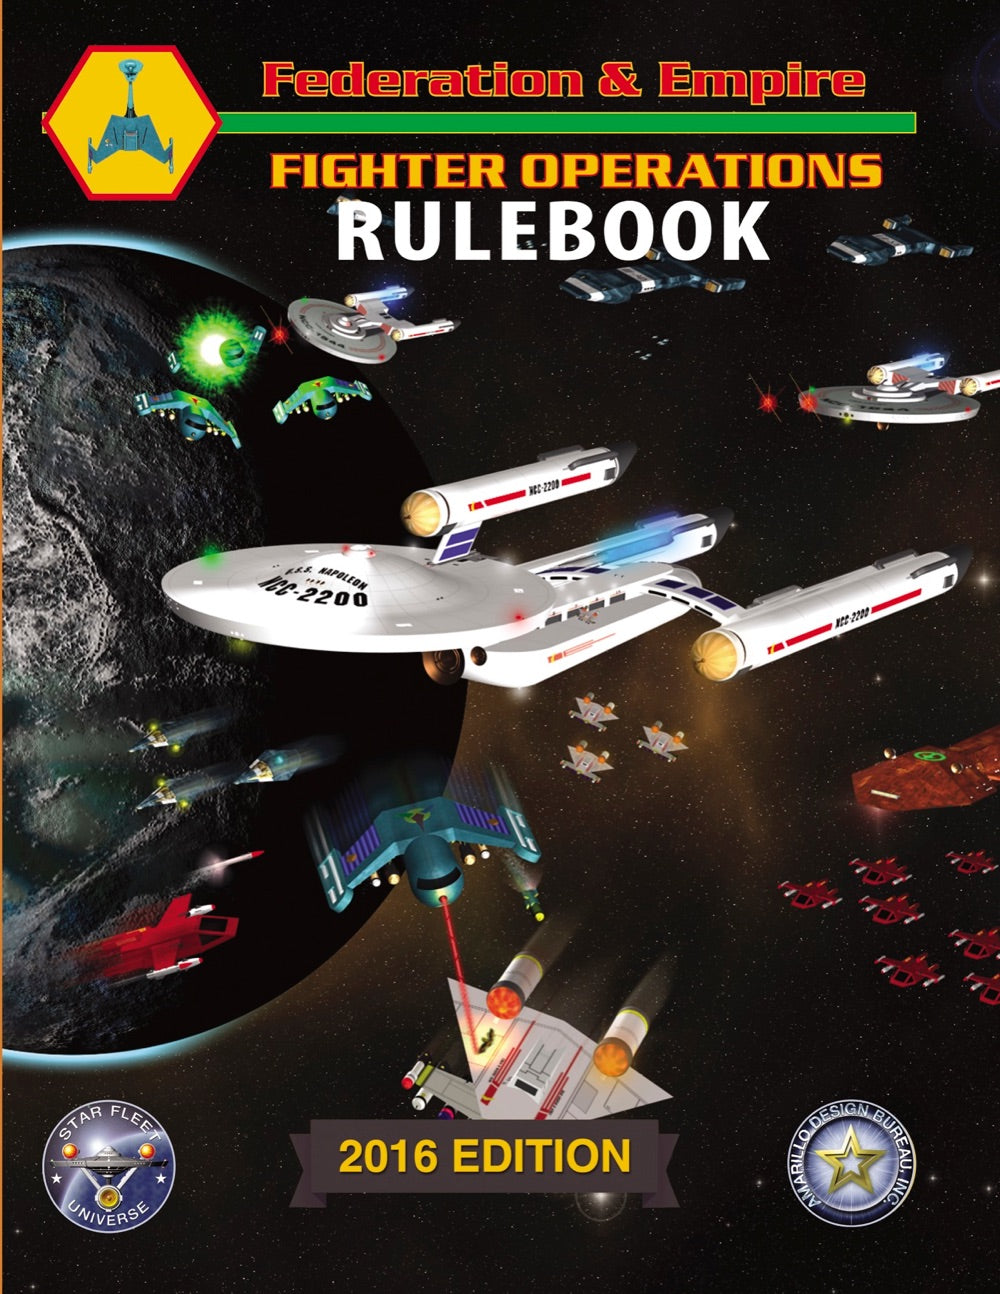 Federation & Empire: Fighter Operations 2016 Rulebook